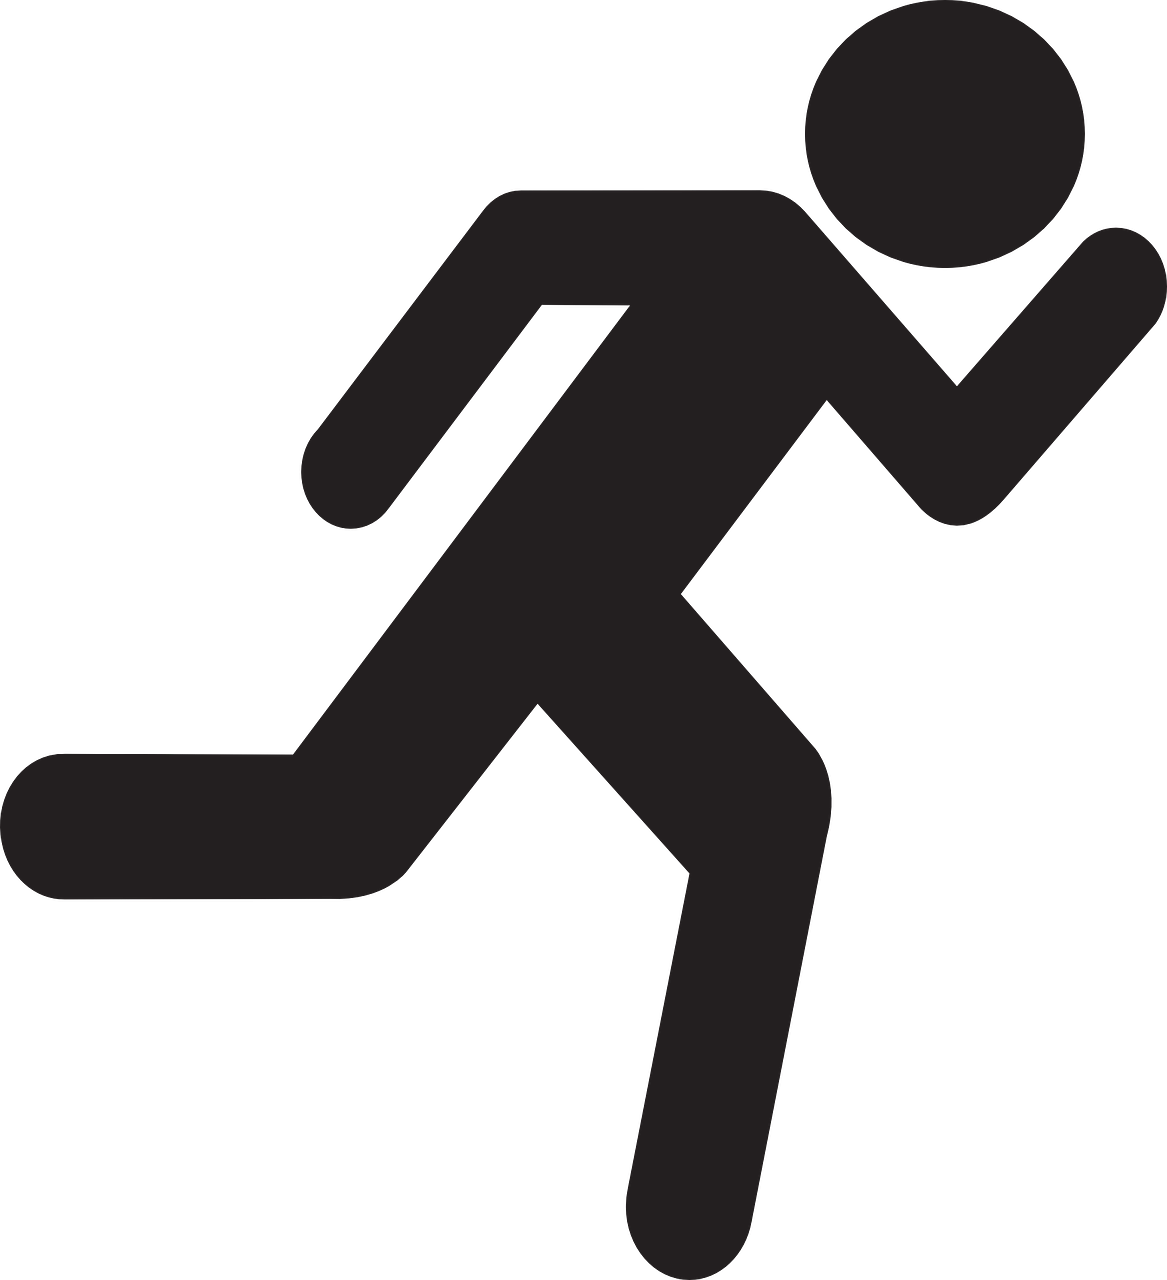 File:runner Stickman.png - Of Stick Figures, Transparent background PNG HD thumbnail